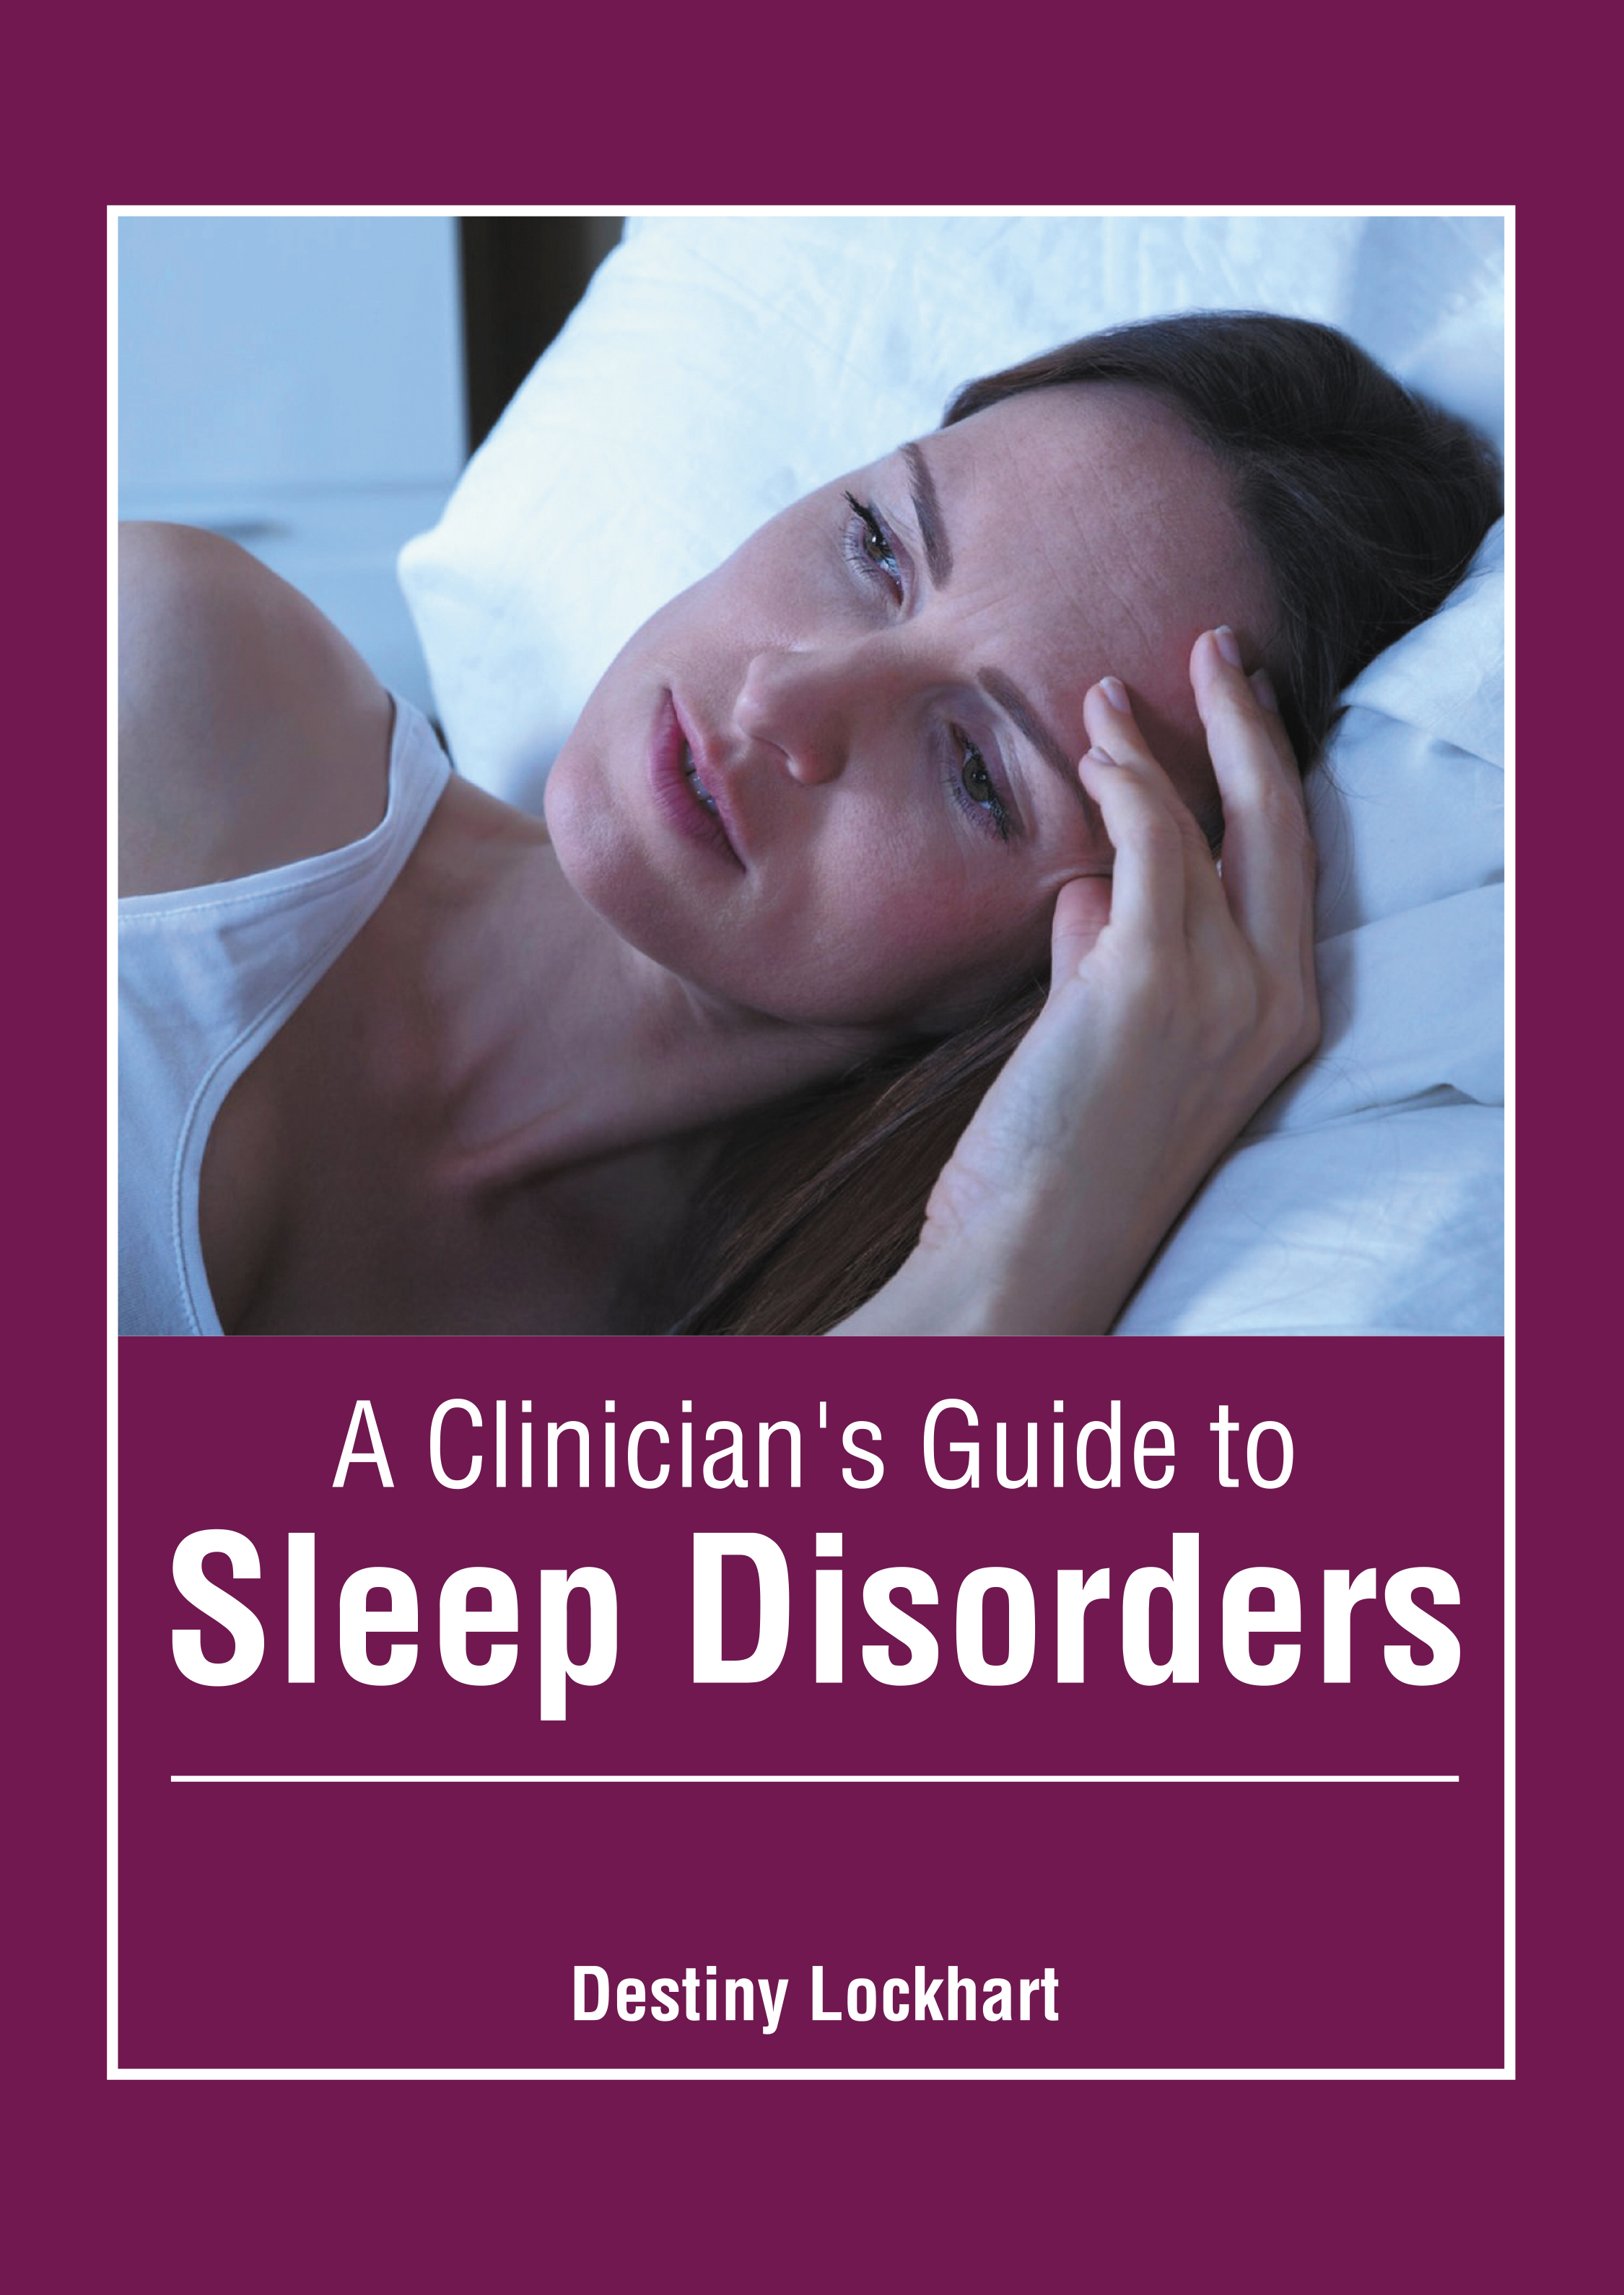 A CLINICIAN'S GUIDE TO SLEEP DISORDERS- ISBN: 9781639270873